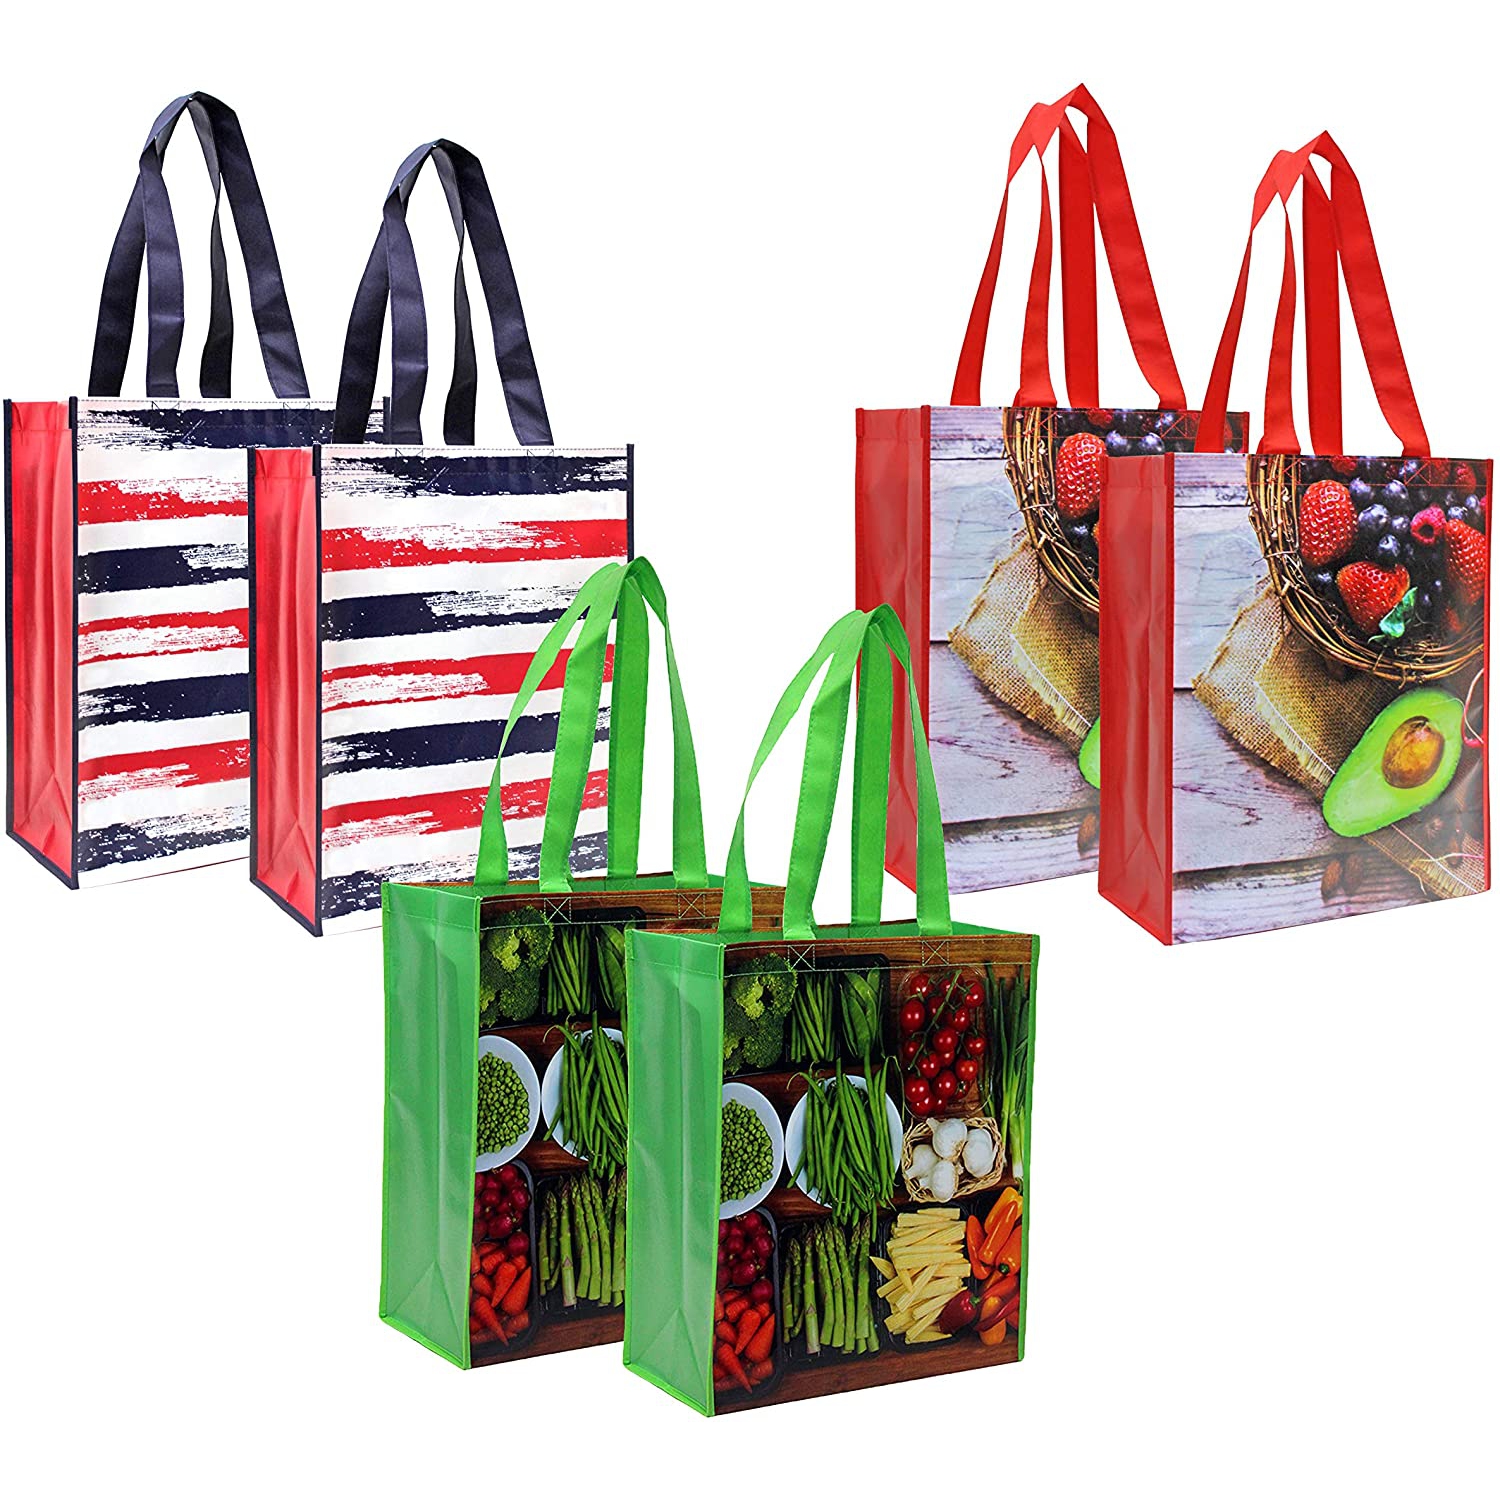 Planet E Reusable Grocery Shopping Bags – Durable Foldable Bags with Colorful Prints (Pack of 6)